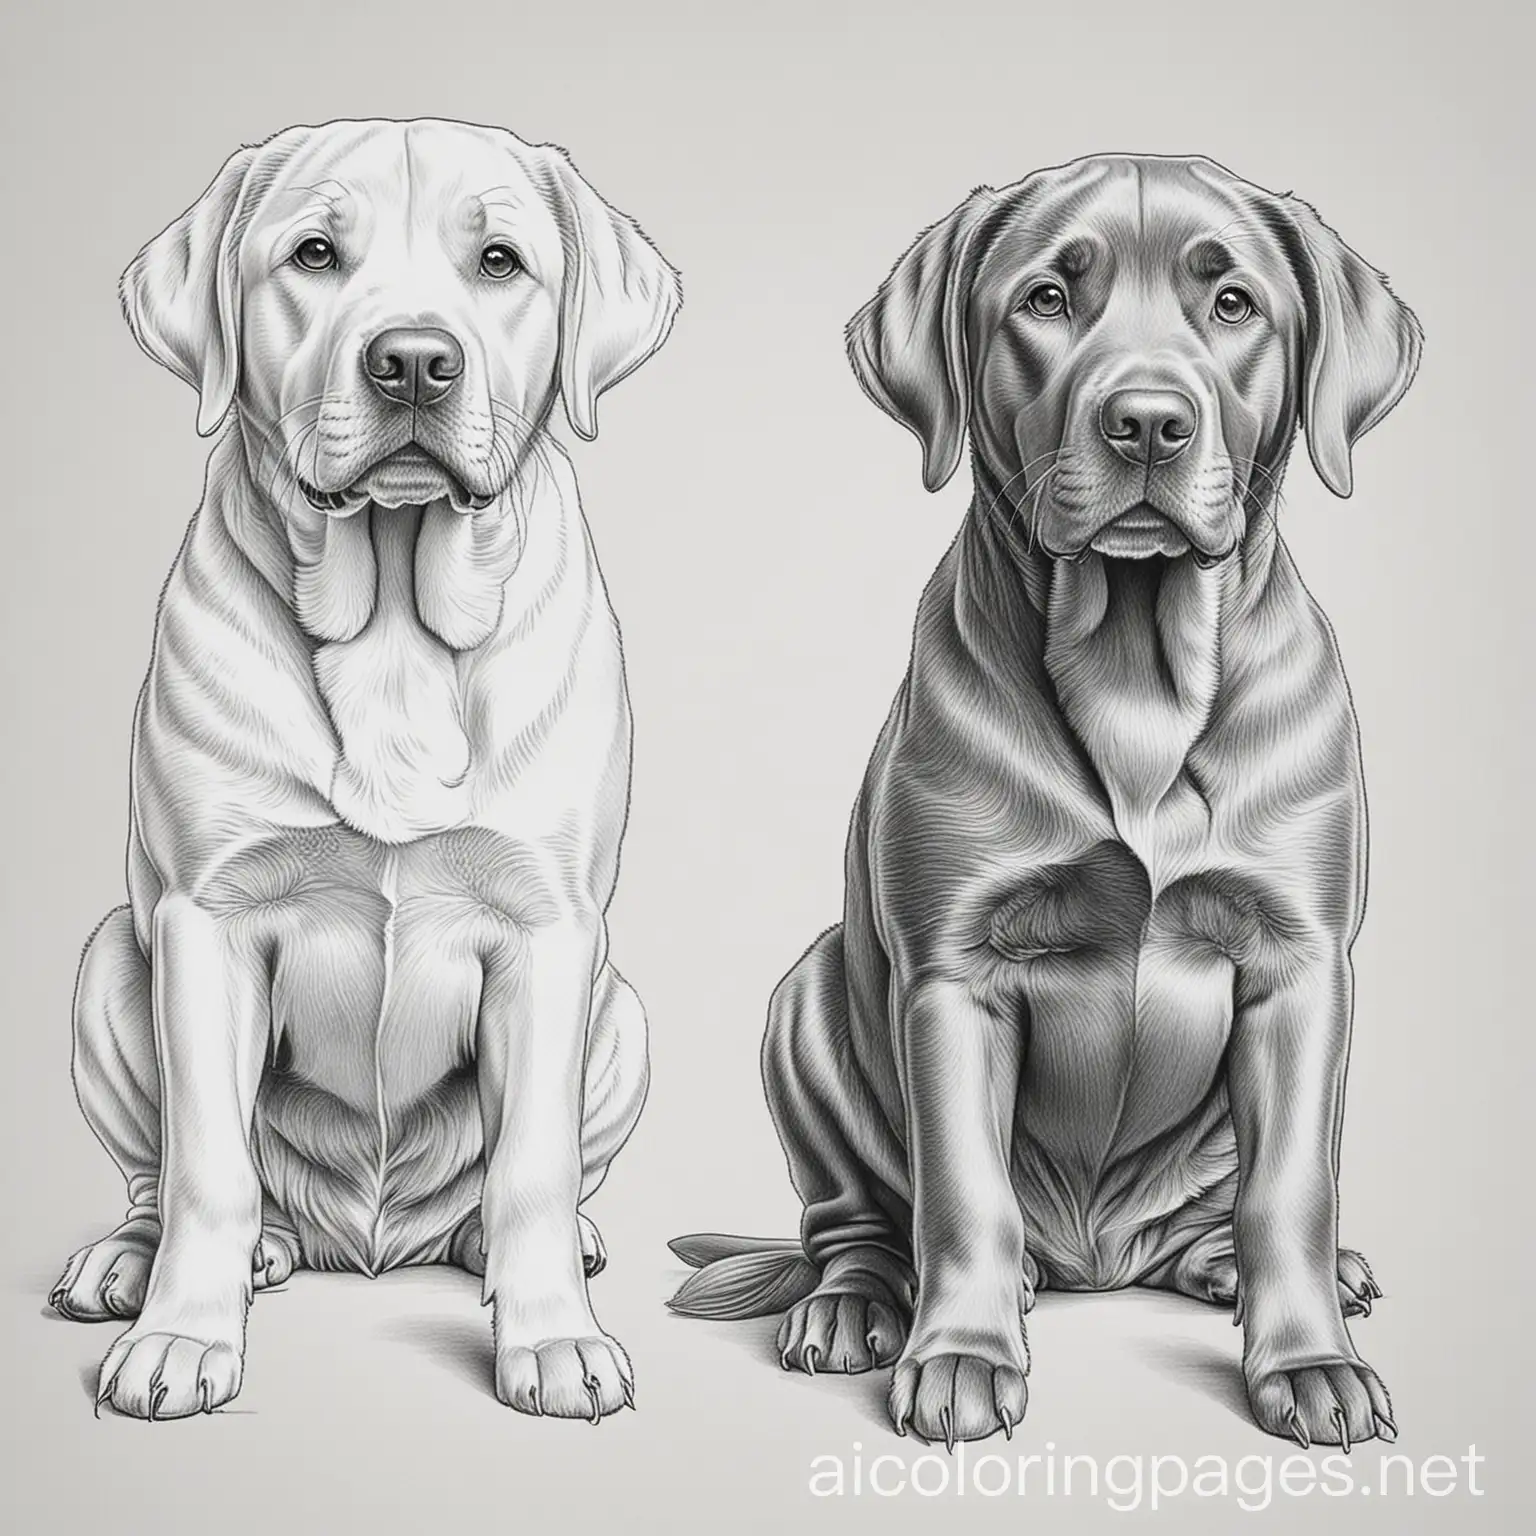 Black lab and chocolate lab, Coloring Page, black and white, line art, white background, Simplicity, Ample White Space. The background of the coloring page is plain white to make it easy for young children to color within the lines. The outlines of all the subjects are easy to distinguish, making it simple for kids to color without too much difficulty